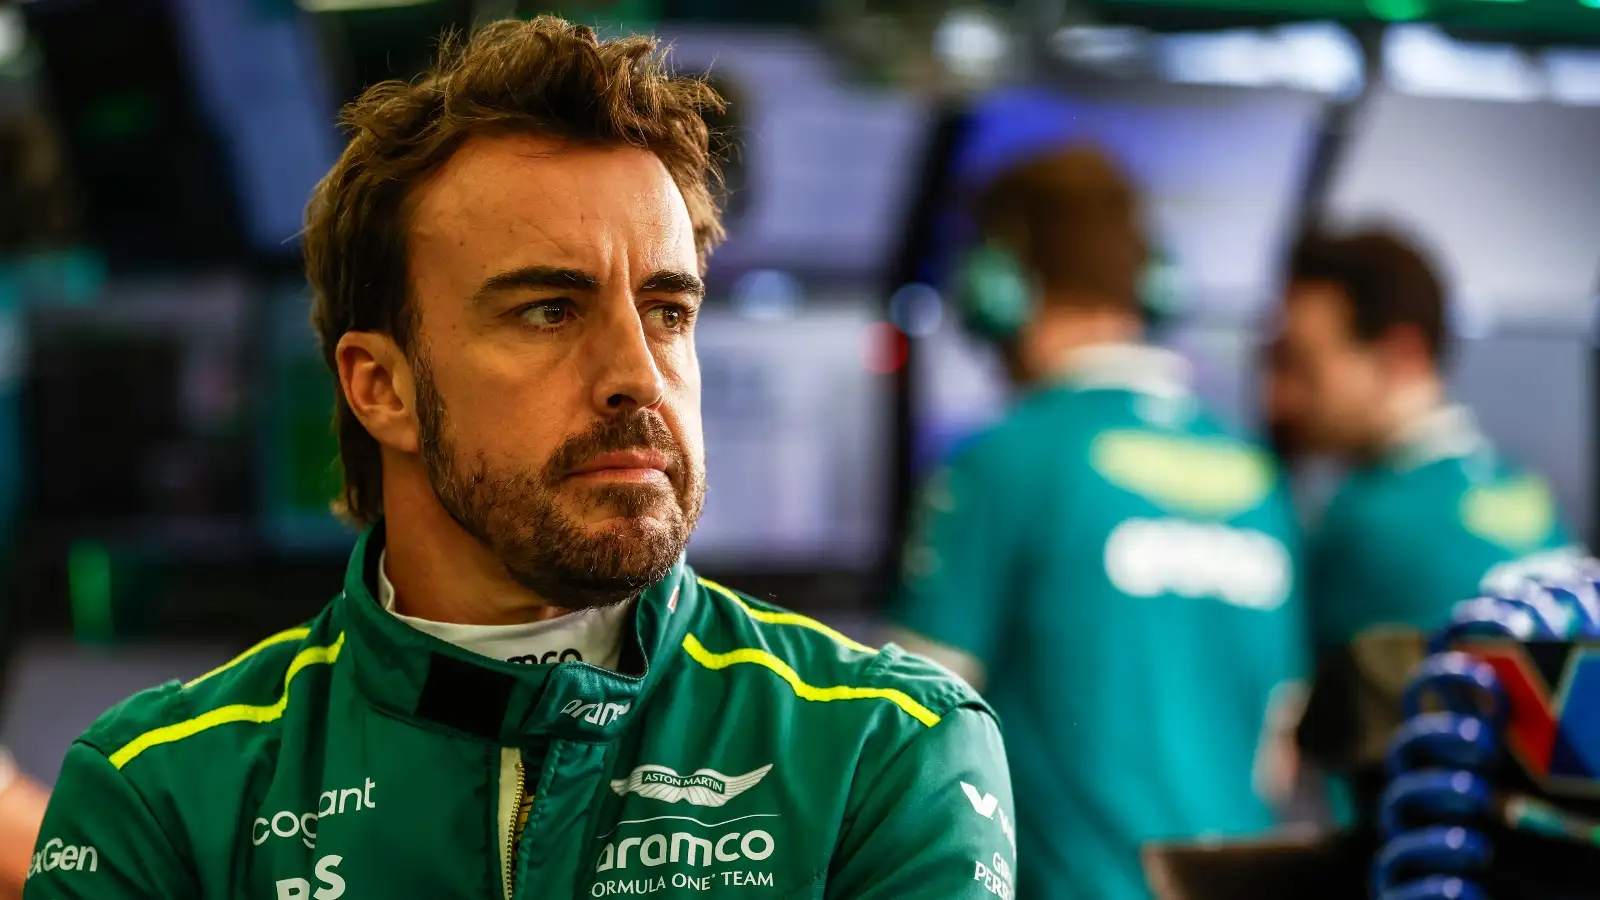 The change Fernando Alonso has made to bring muscle back to 'maximum' levels